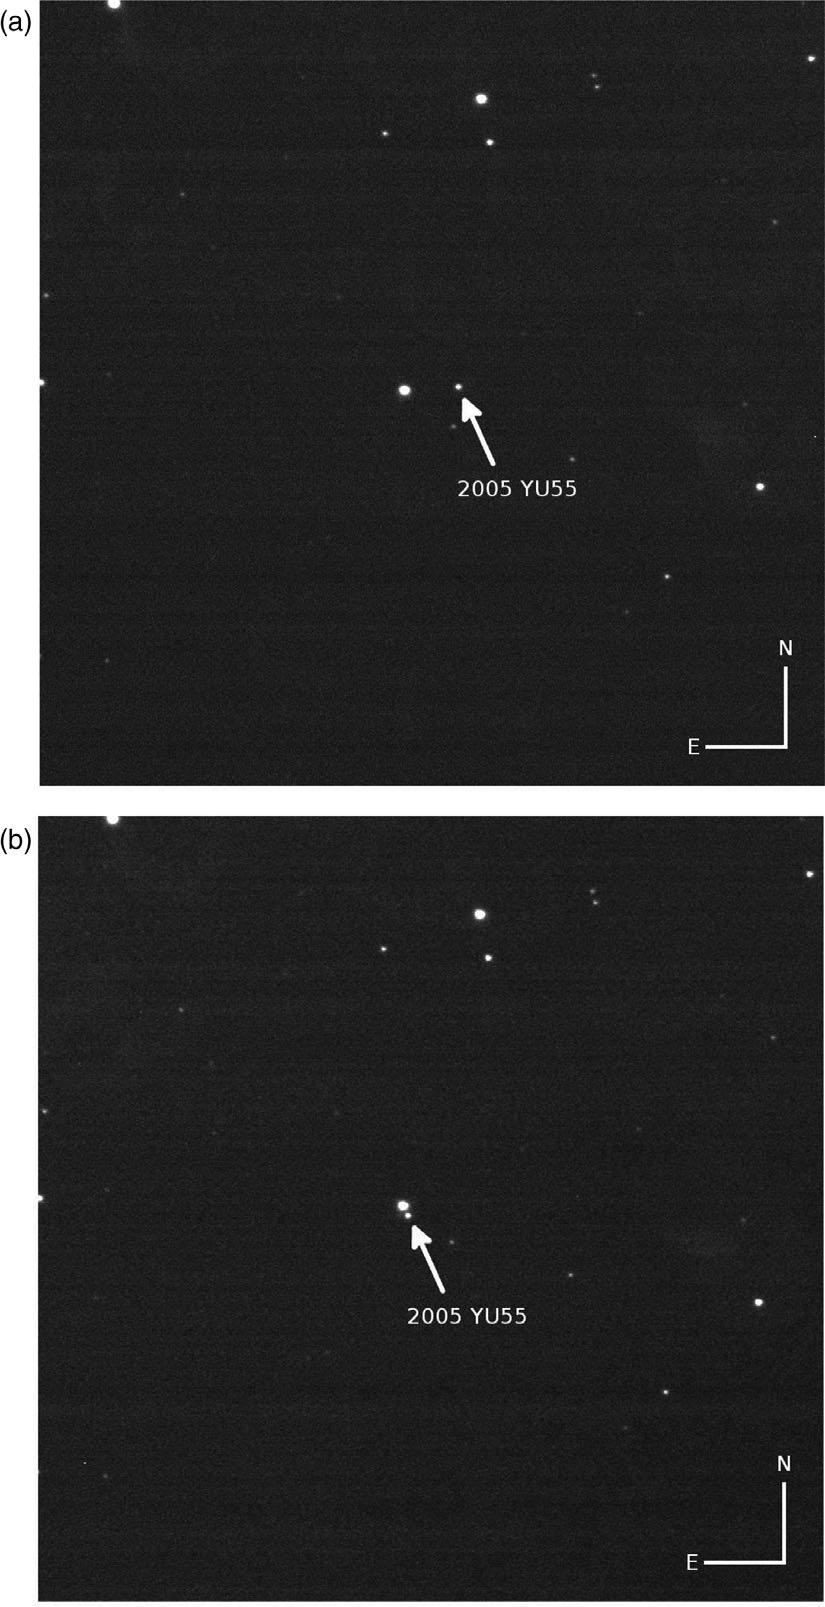 4 Todd et al. working group was calculated by taking 3 600 observations between 2005 December and 2011 December and fitting a numerical model of the asteroid motion.